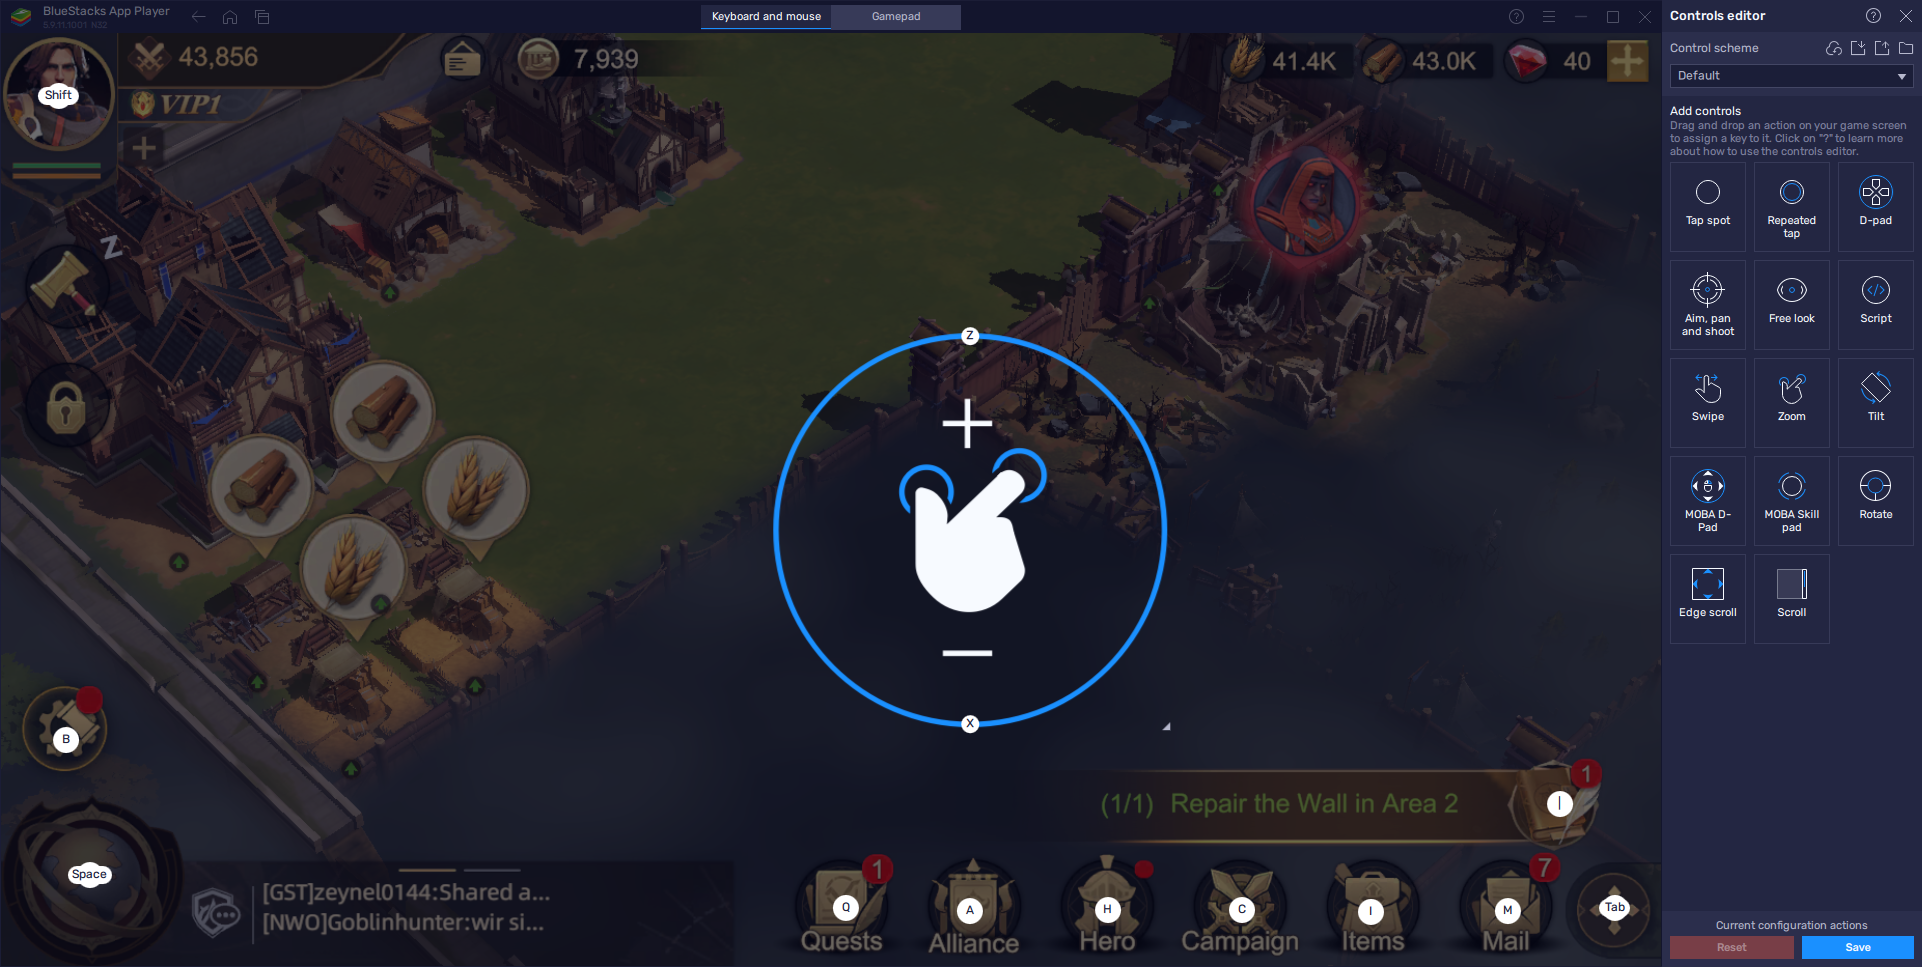 Land of Empires: Immortal on PC - How to Optimize Your Progression Using Our BlueStacks Tools